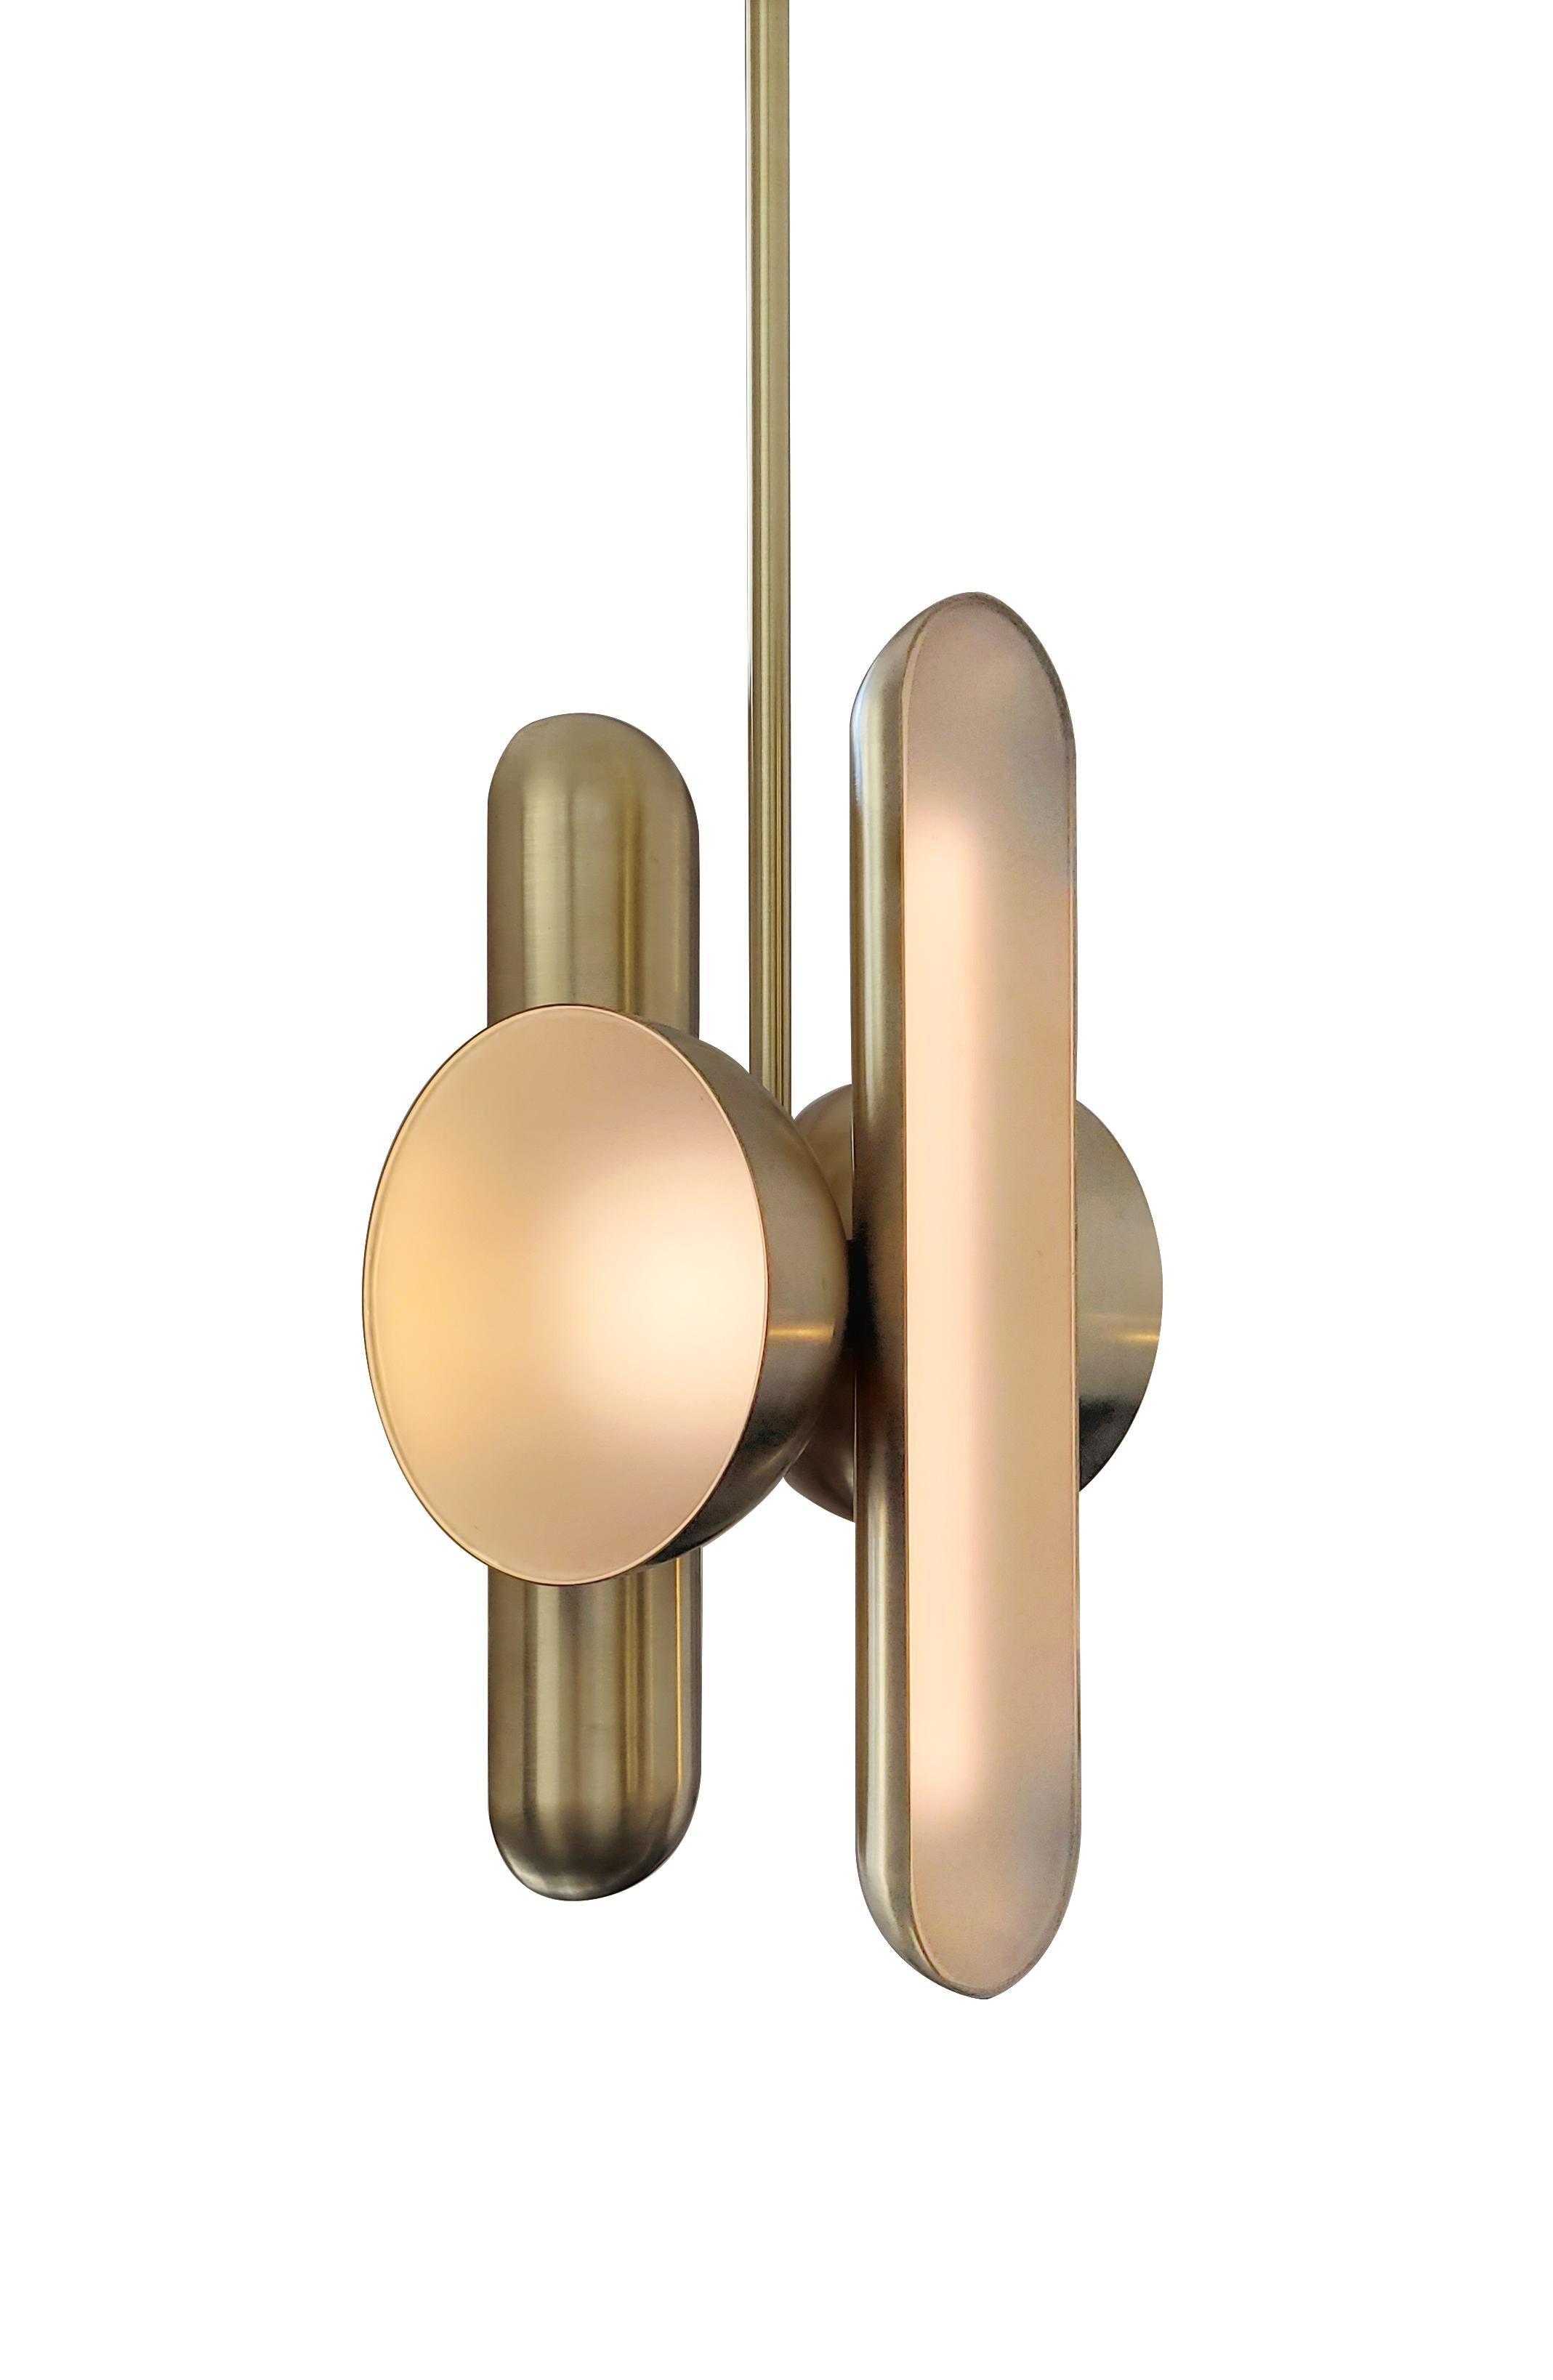 Aurata pendant lamp by Jan Garncarek
Dimensions: 21 x 22 x H 56 cm
Material: Brass, frosted glass.
Handcrafted by Jan Garncarek.

Information:
weight:10 kg / 22 lb
voltage: 120V, 240V
lamping: 4 X 1 2 W dimmable LED module
lumens:1000